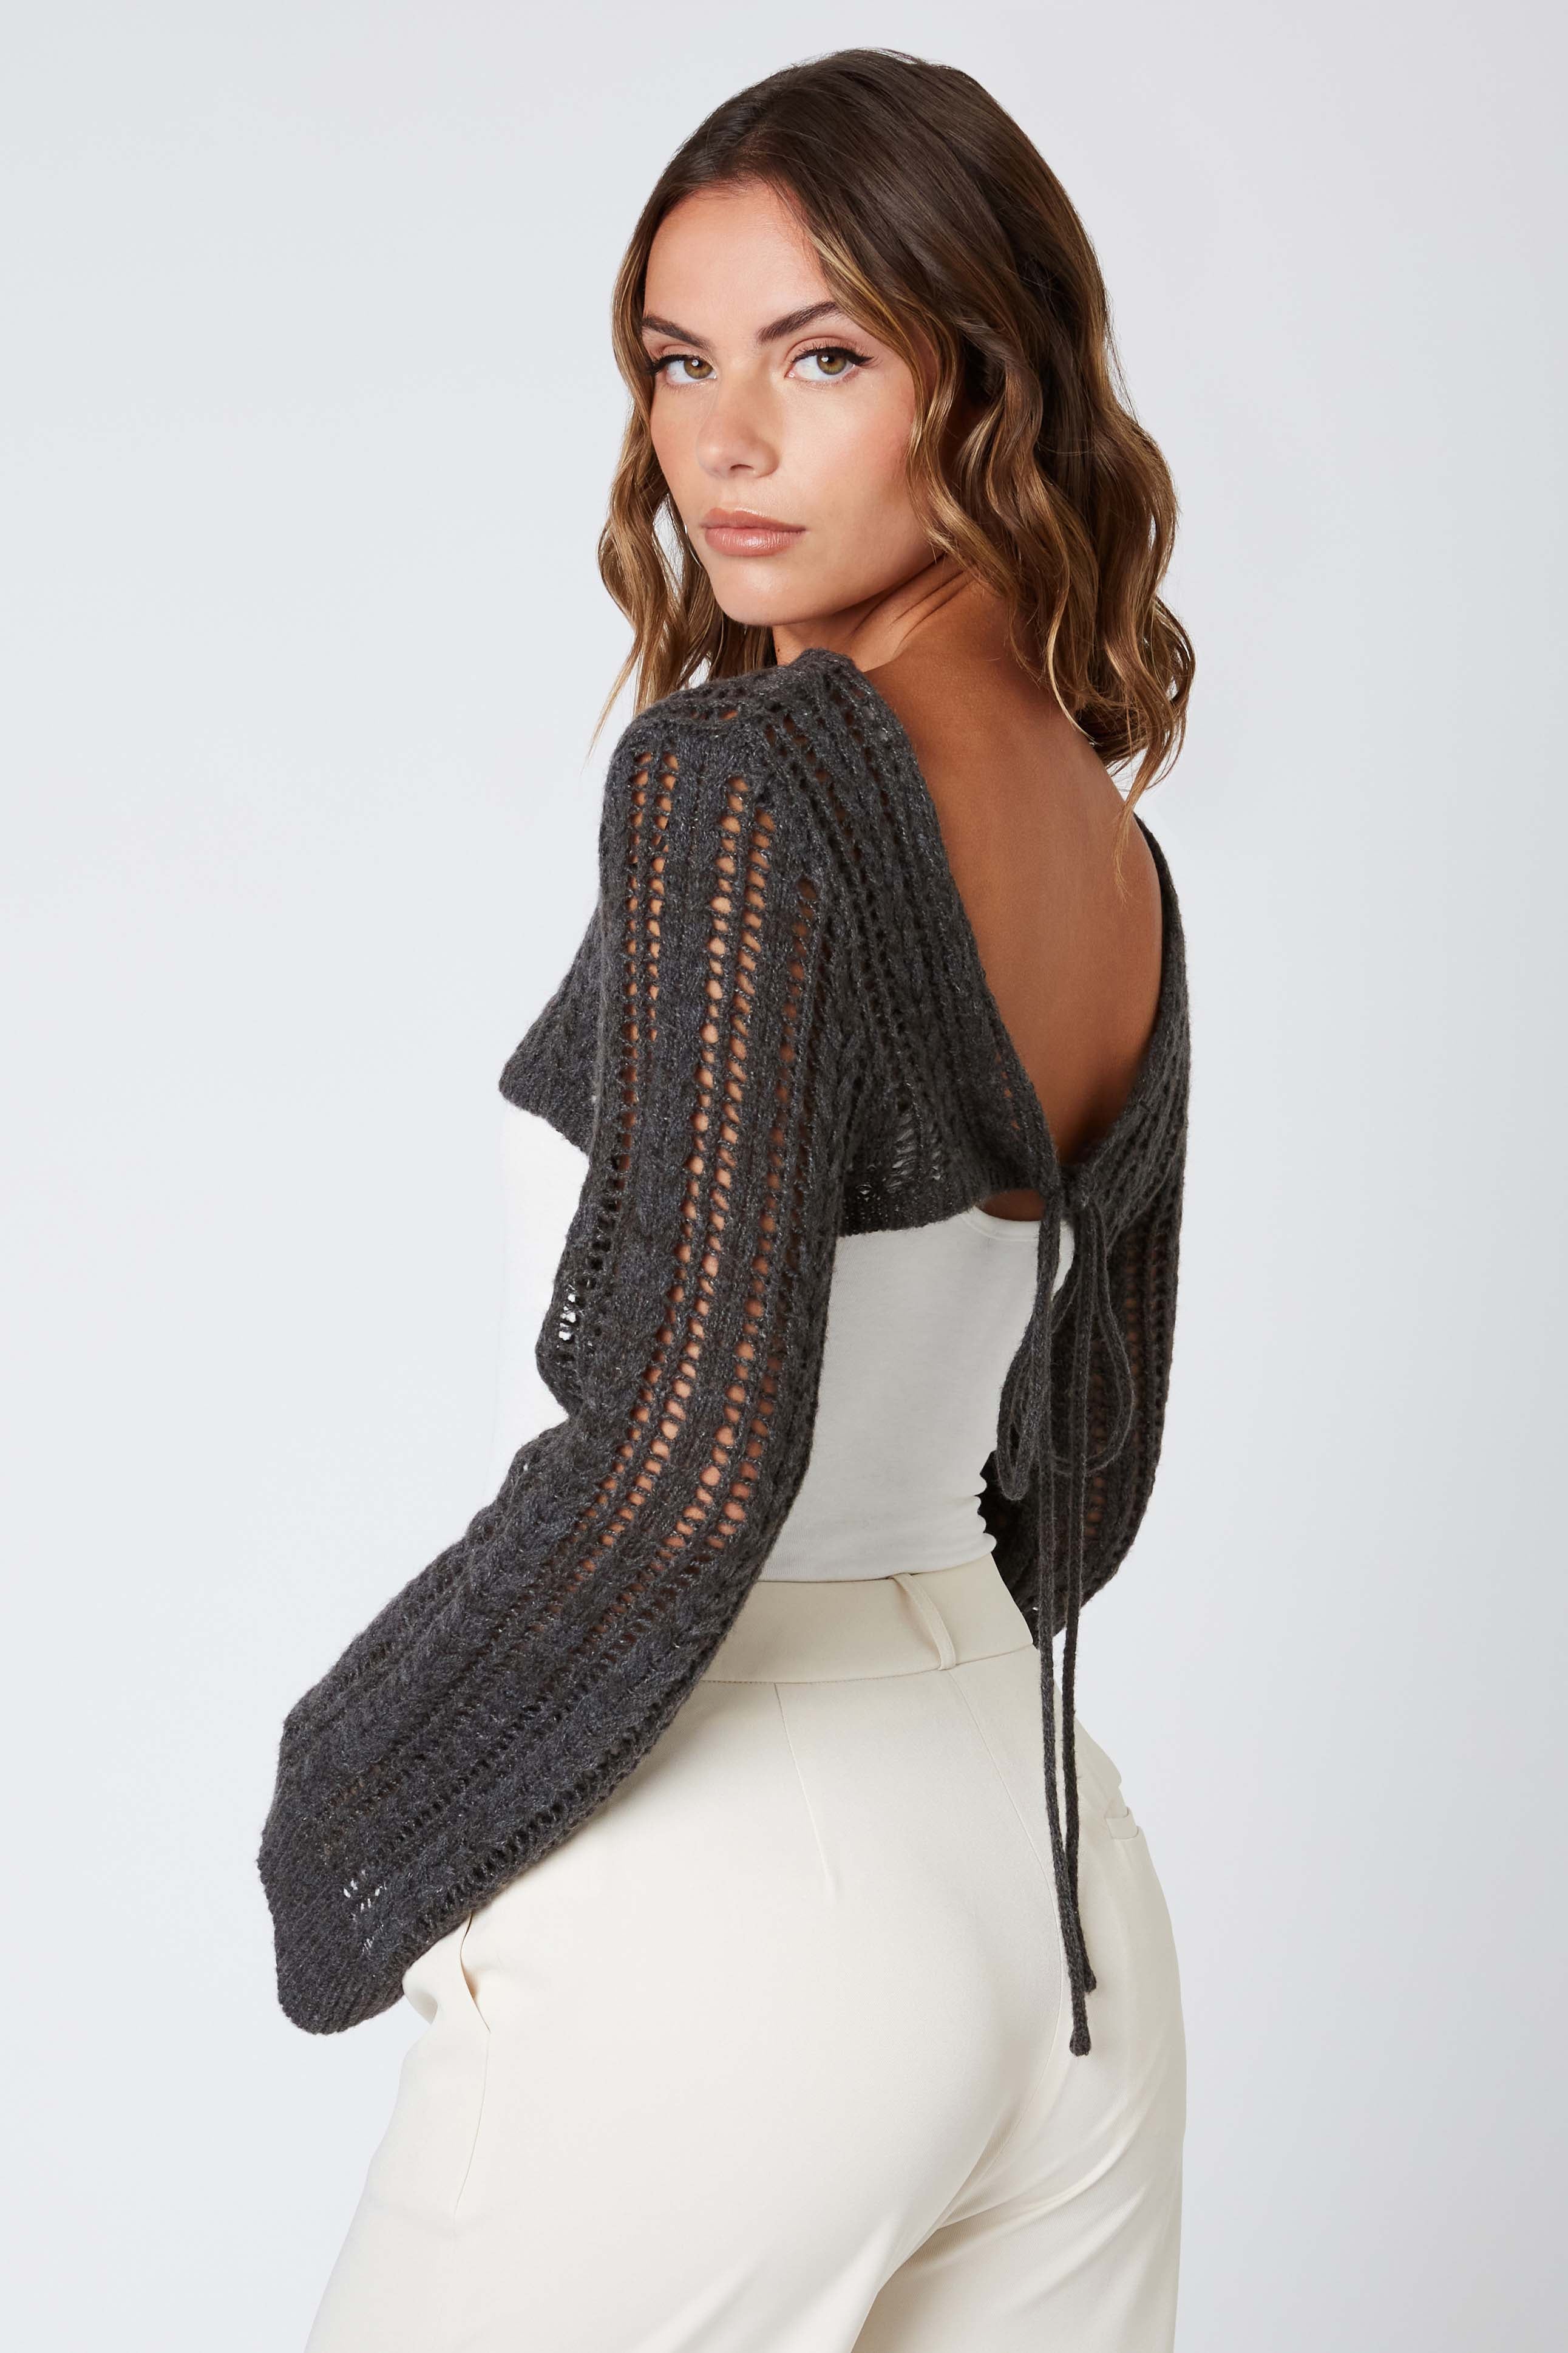 Open Knit Shrug in Charcoal Back View